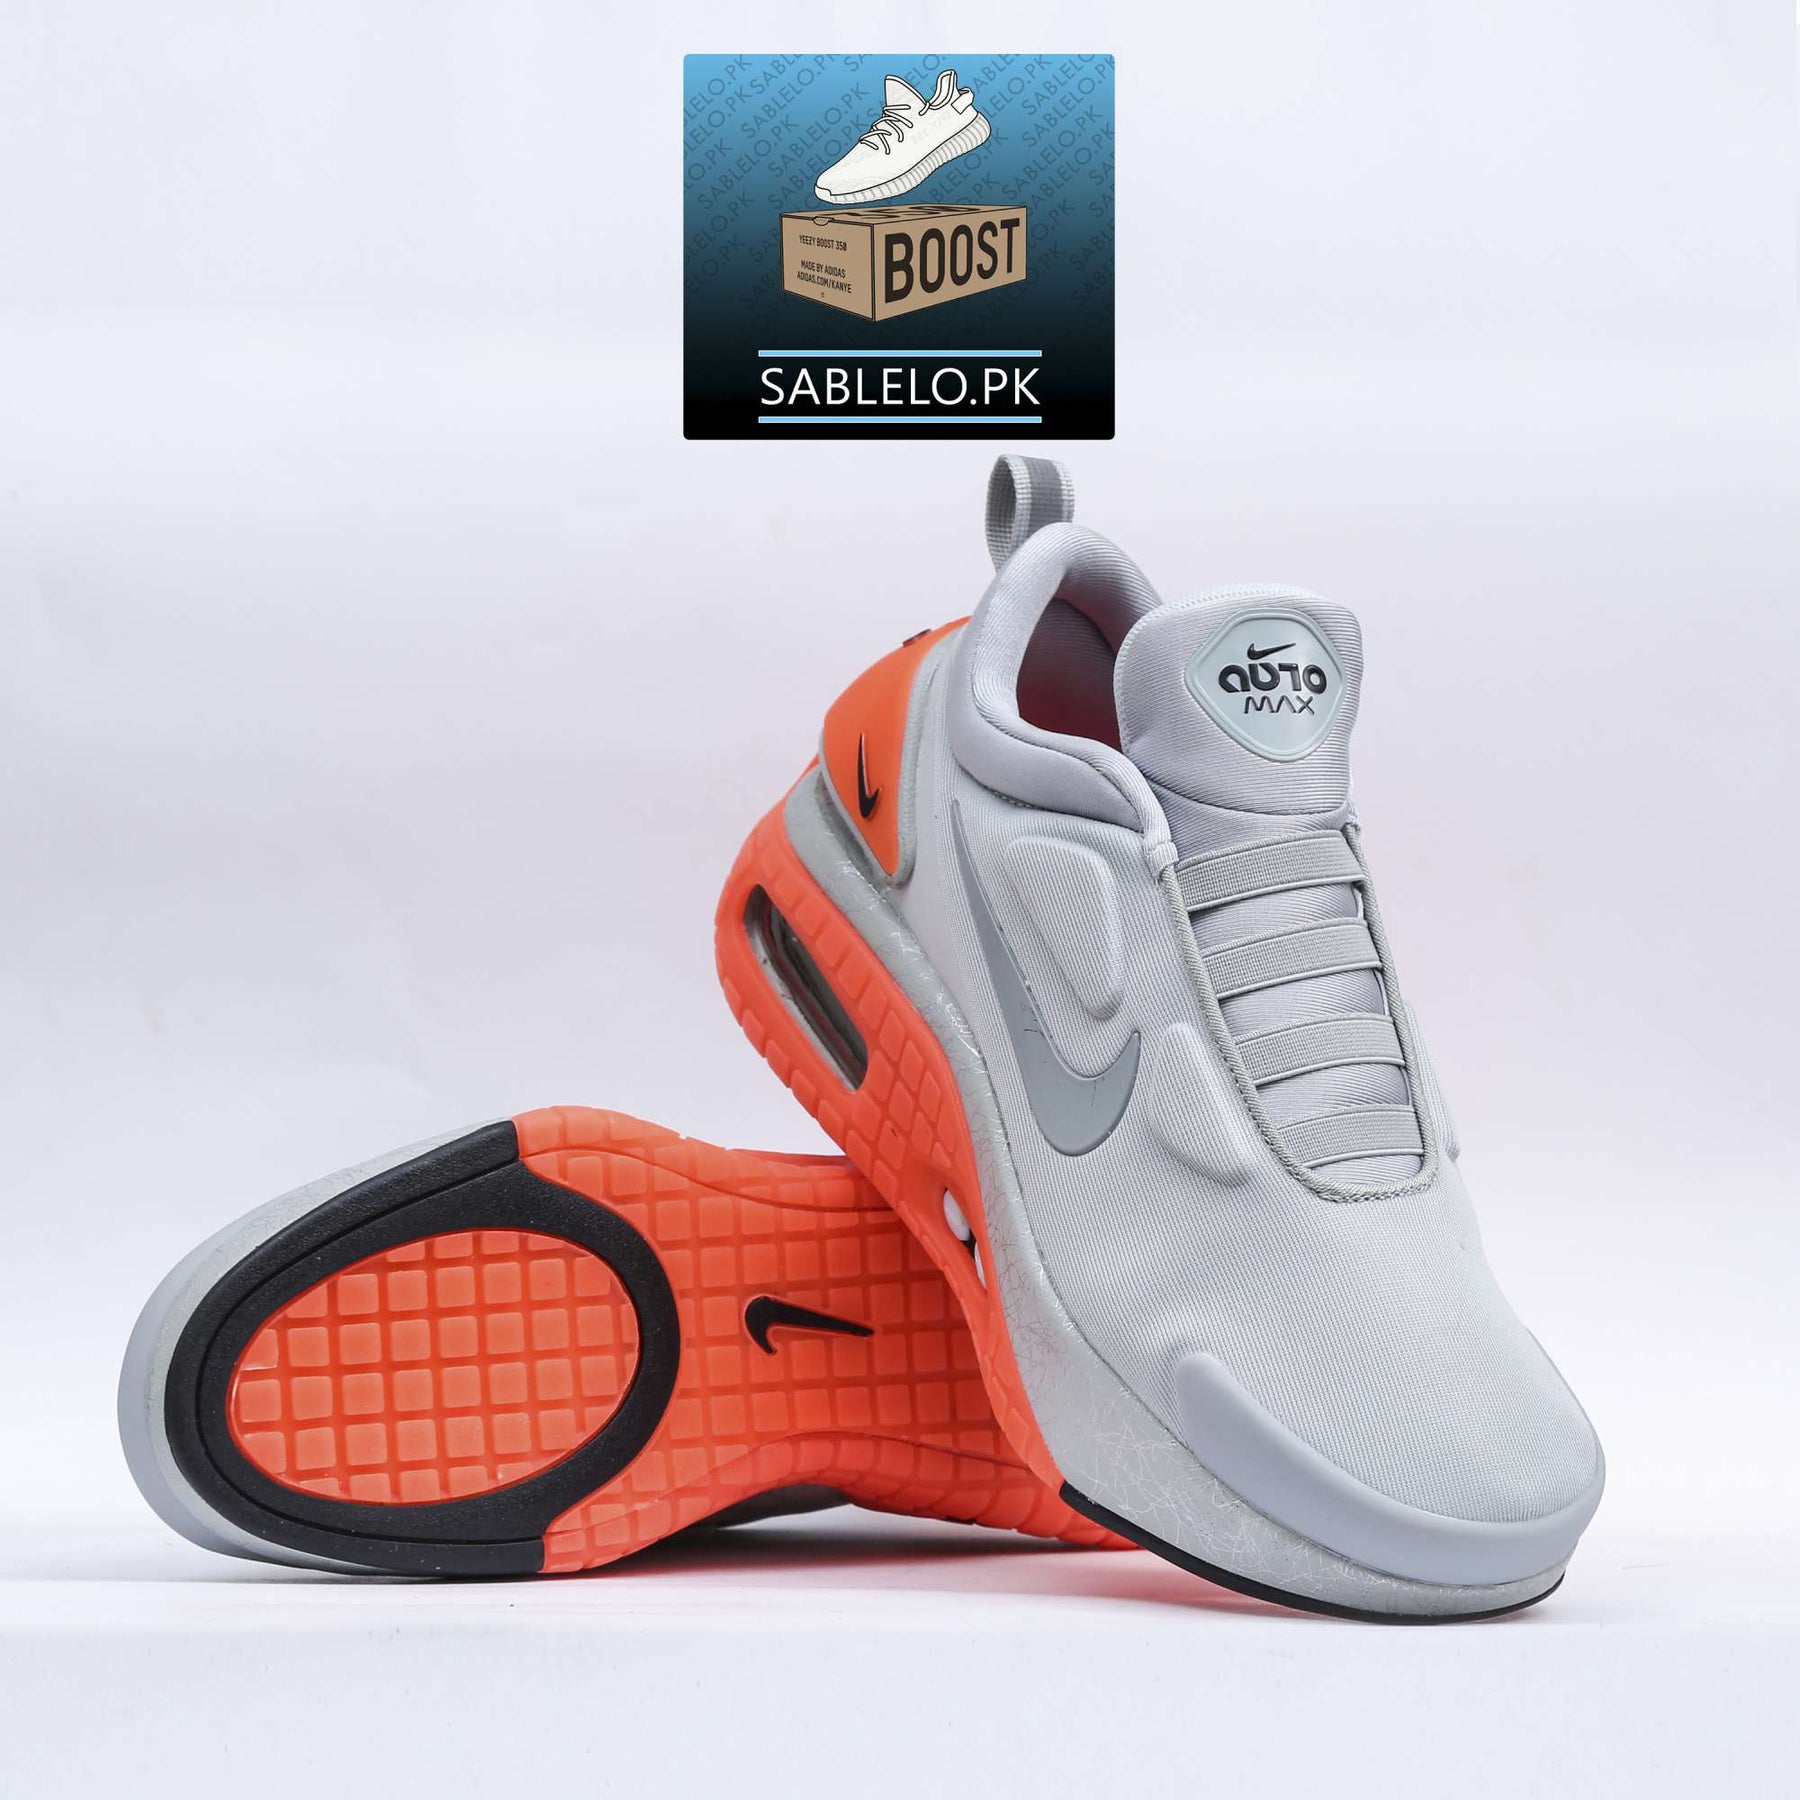 Nike Adobt Auto Max Light Gray orange - Premium Shoes from perfectshop - Just Rs.8999! Shop now at Sablelo.pk